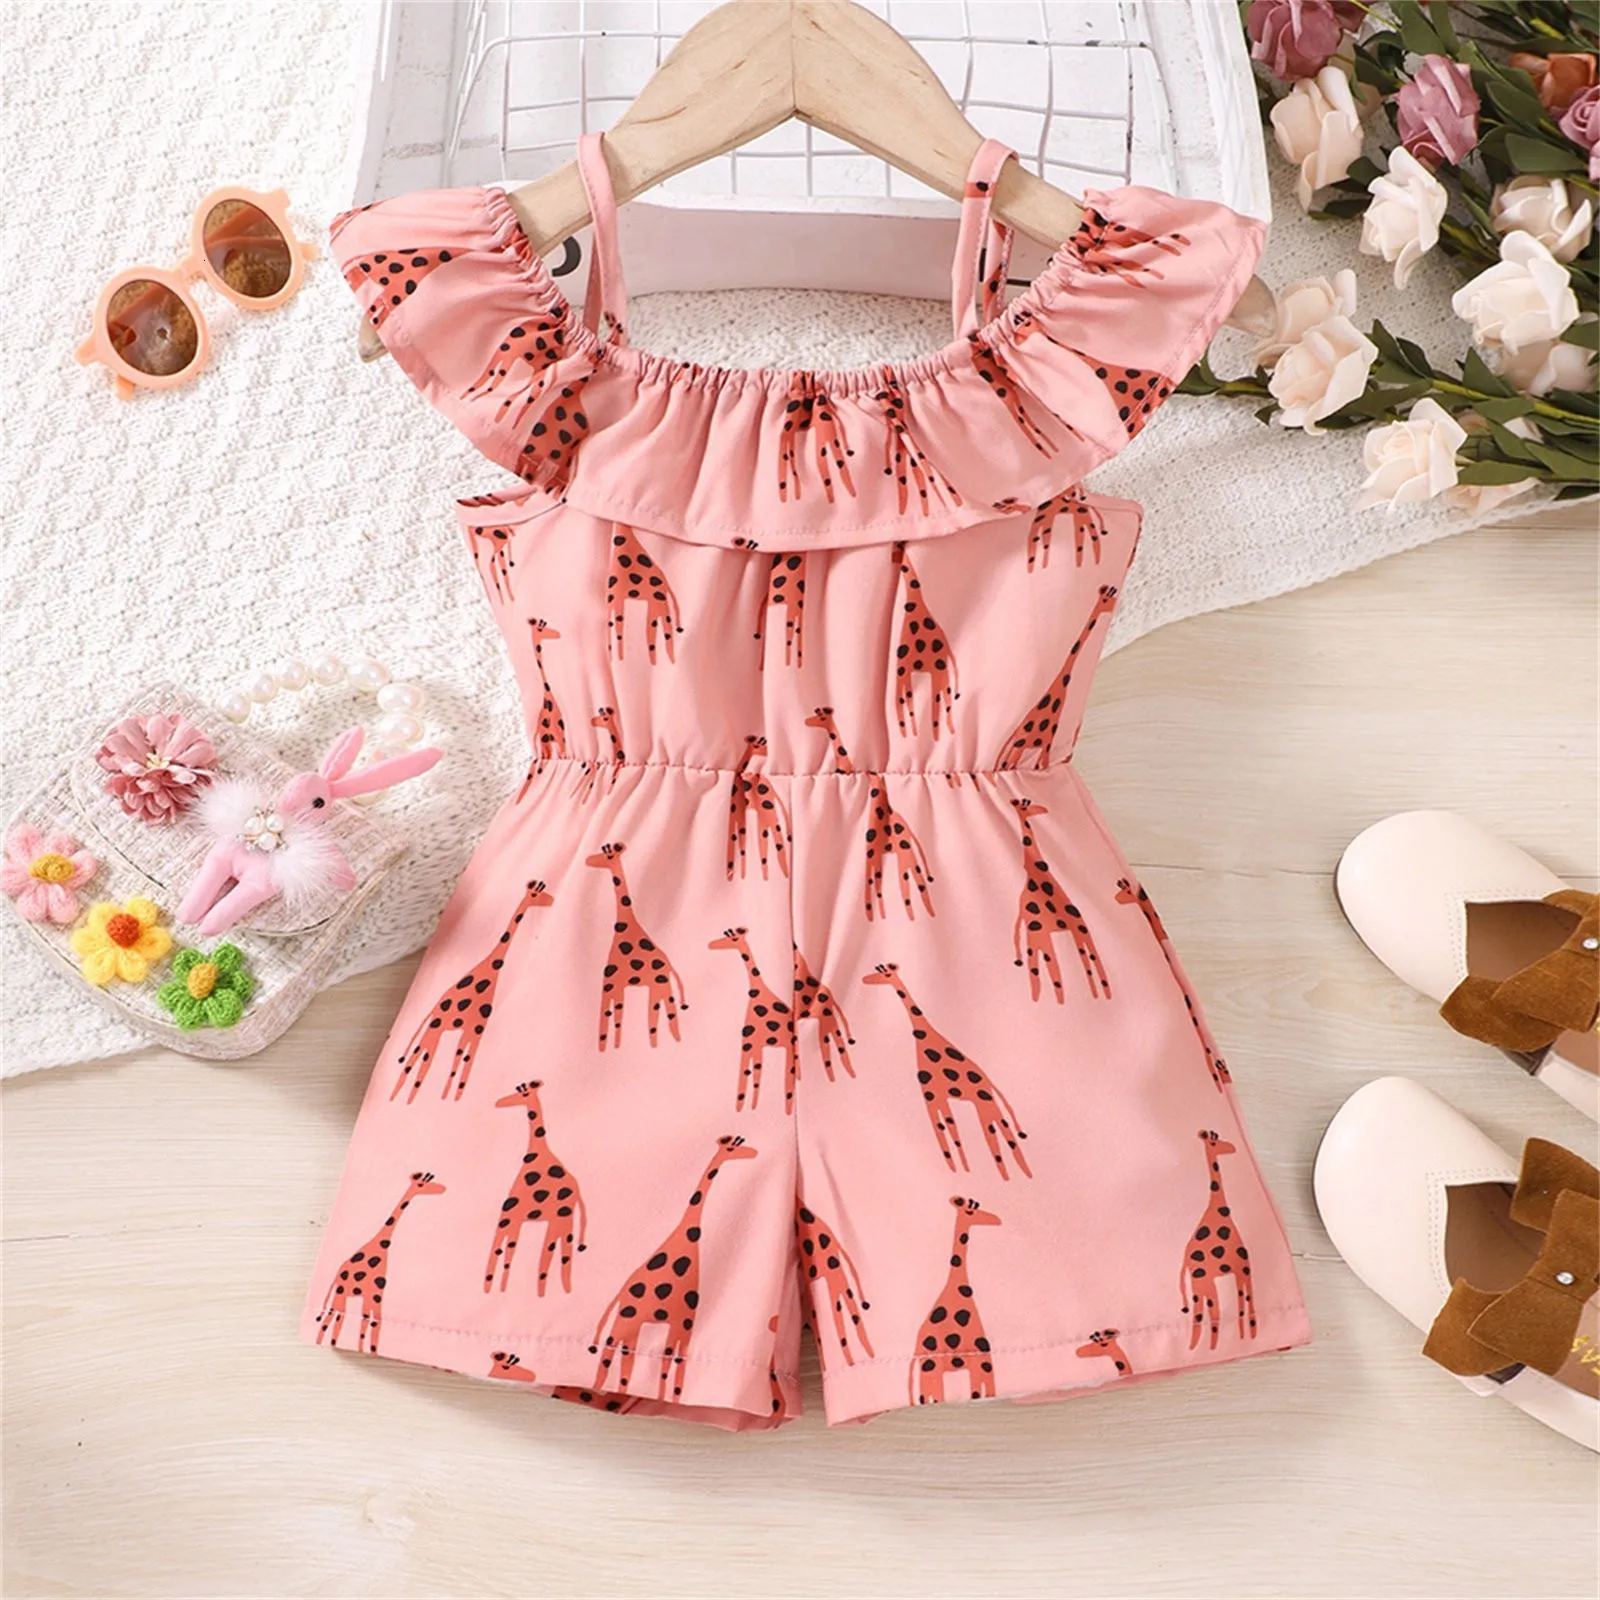 Overalls Girls Giraffe Pattern Jumpsuit Teen Wide Leg Rompers Kids Summer Casual Shorts Toddler Clothes Fall Romper Baby Girl 230608